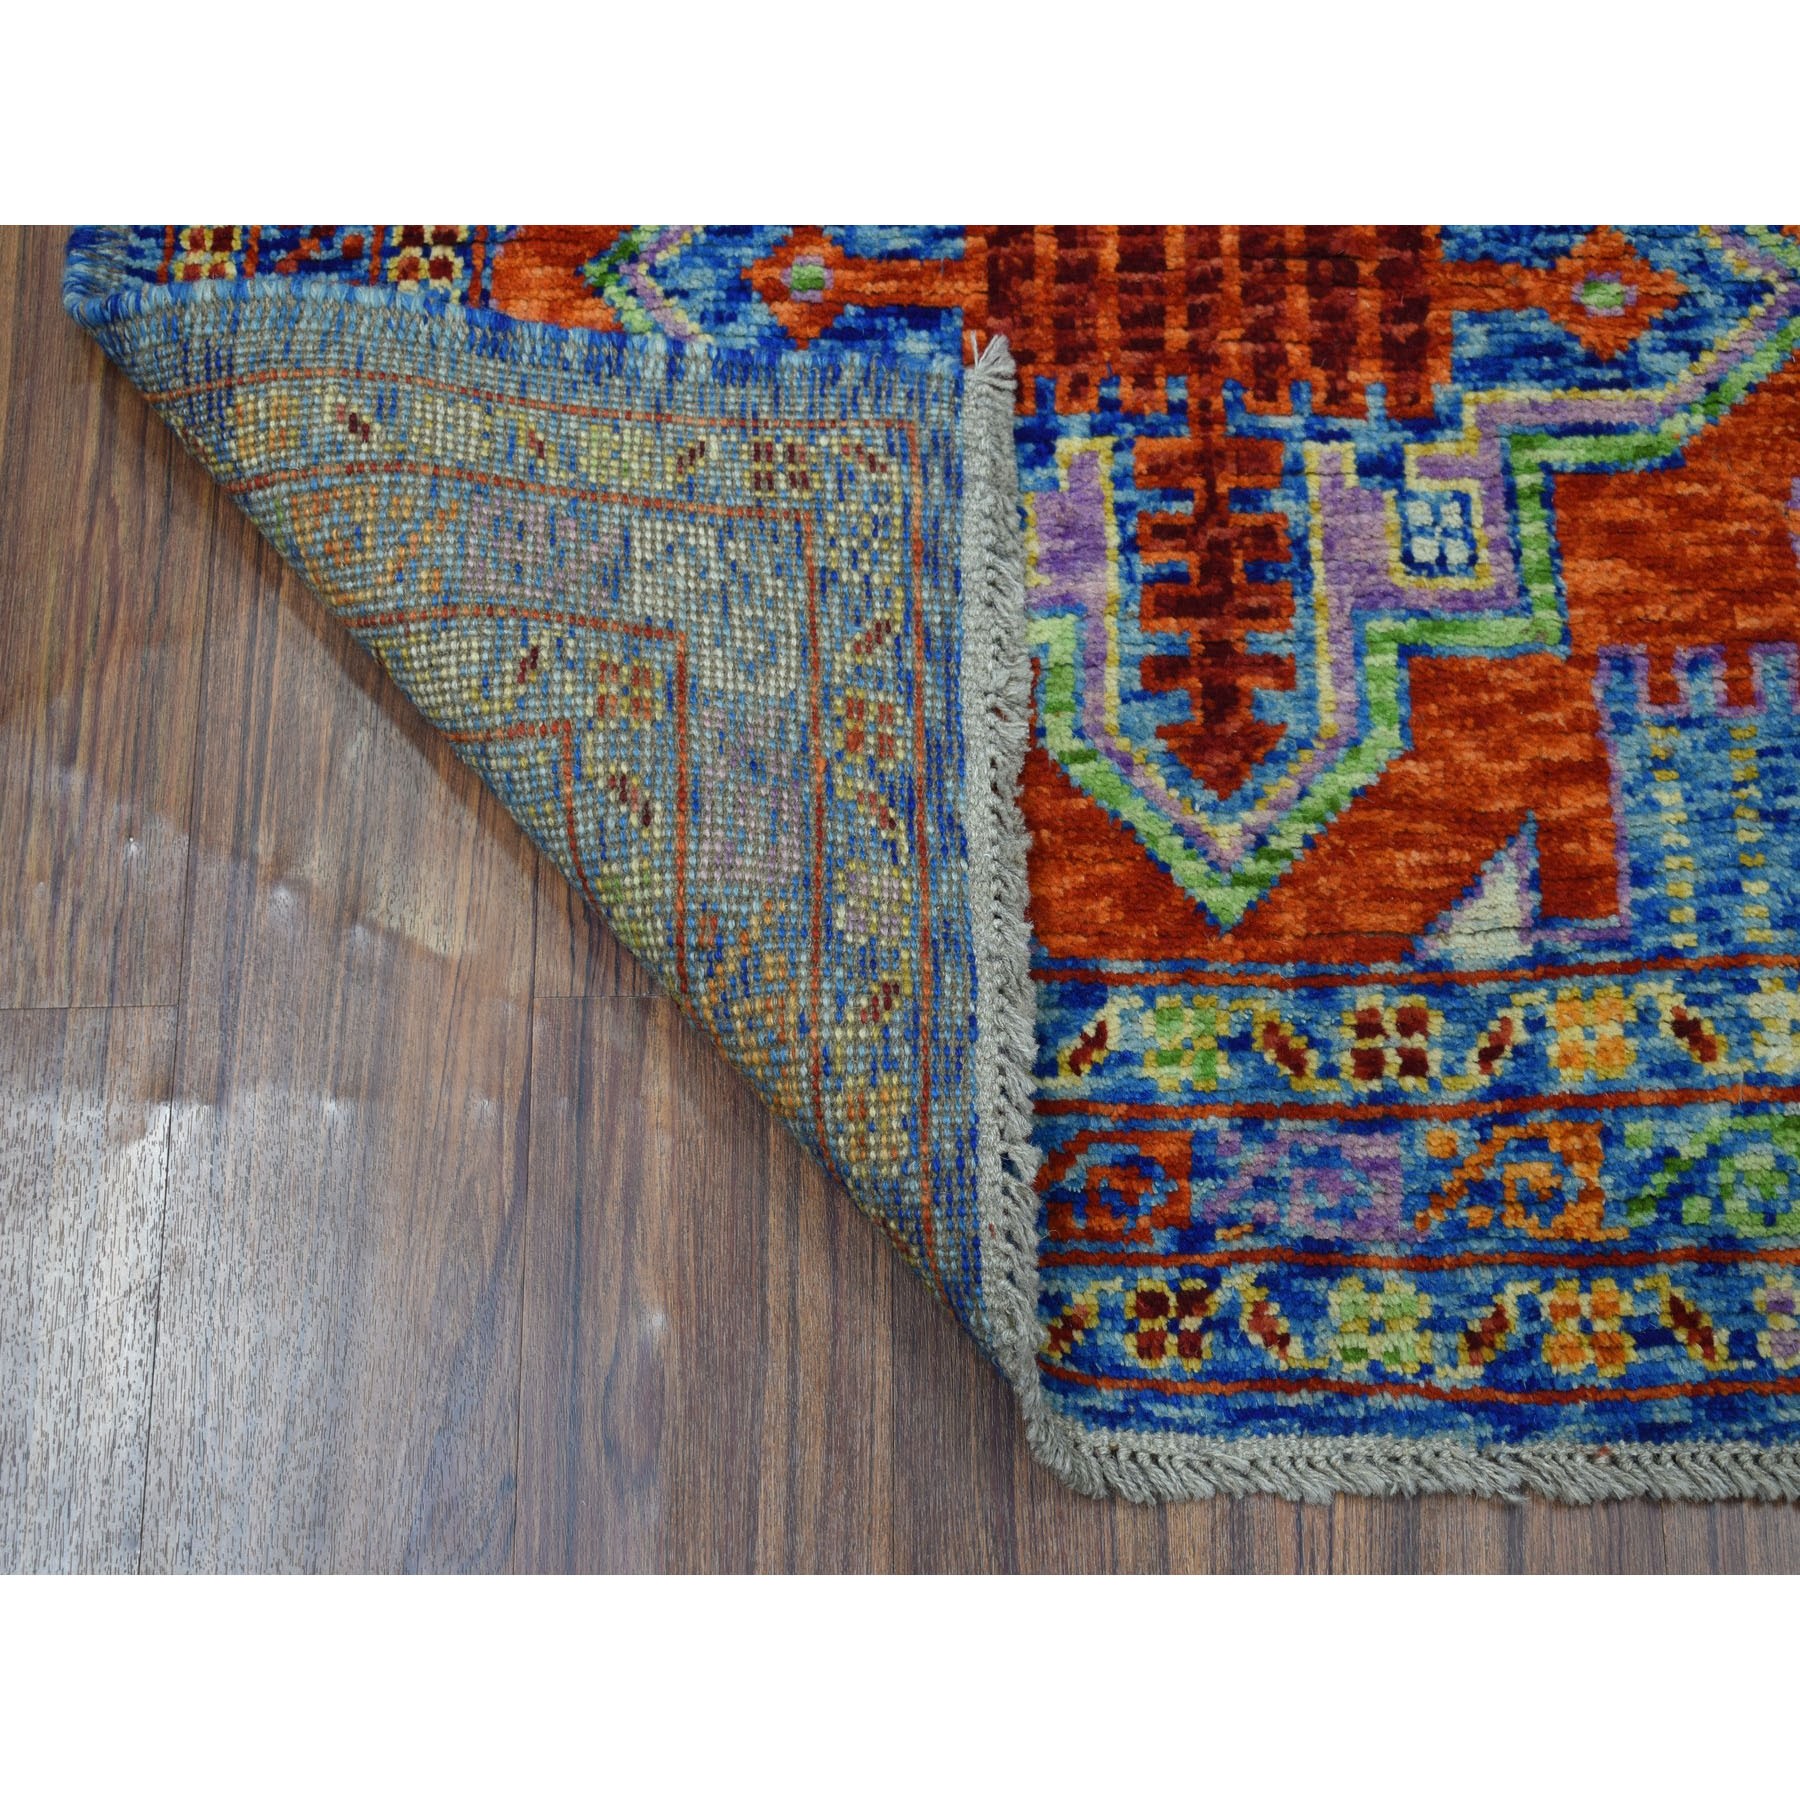 3-4 x5- Orange Geometric Design Colorful Afghan Baluch Hand Knotted 100% Wool Oriental Rug 